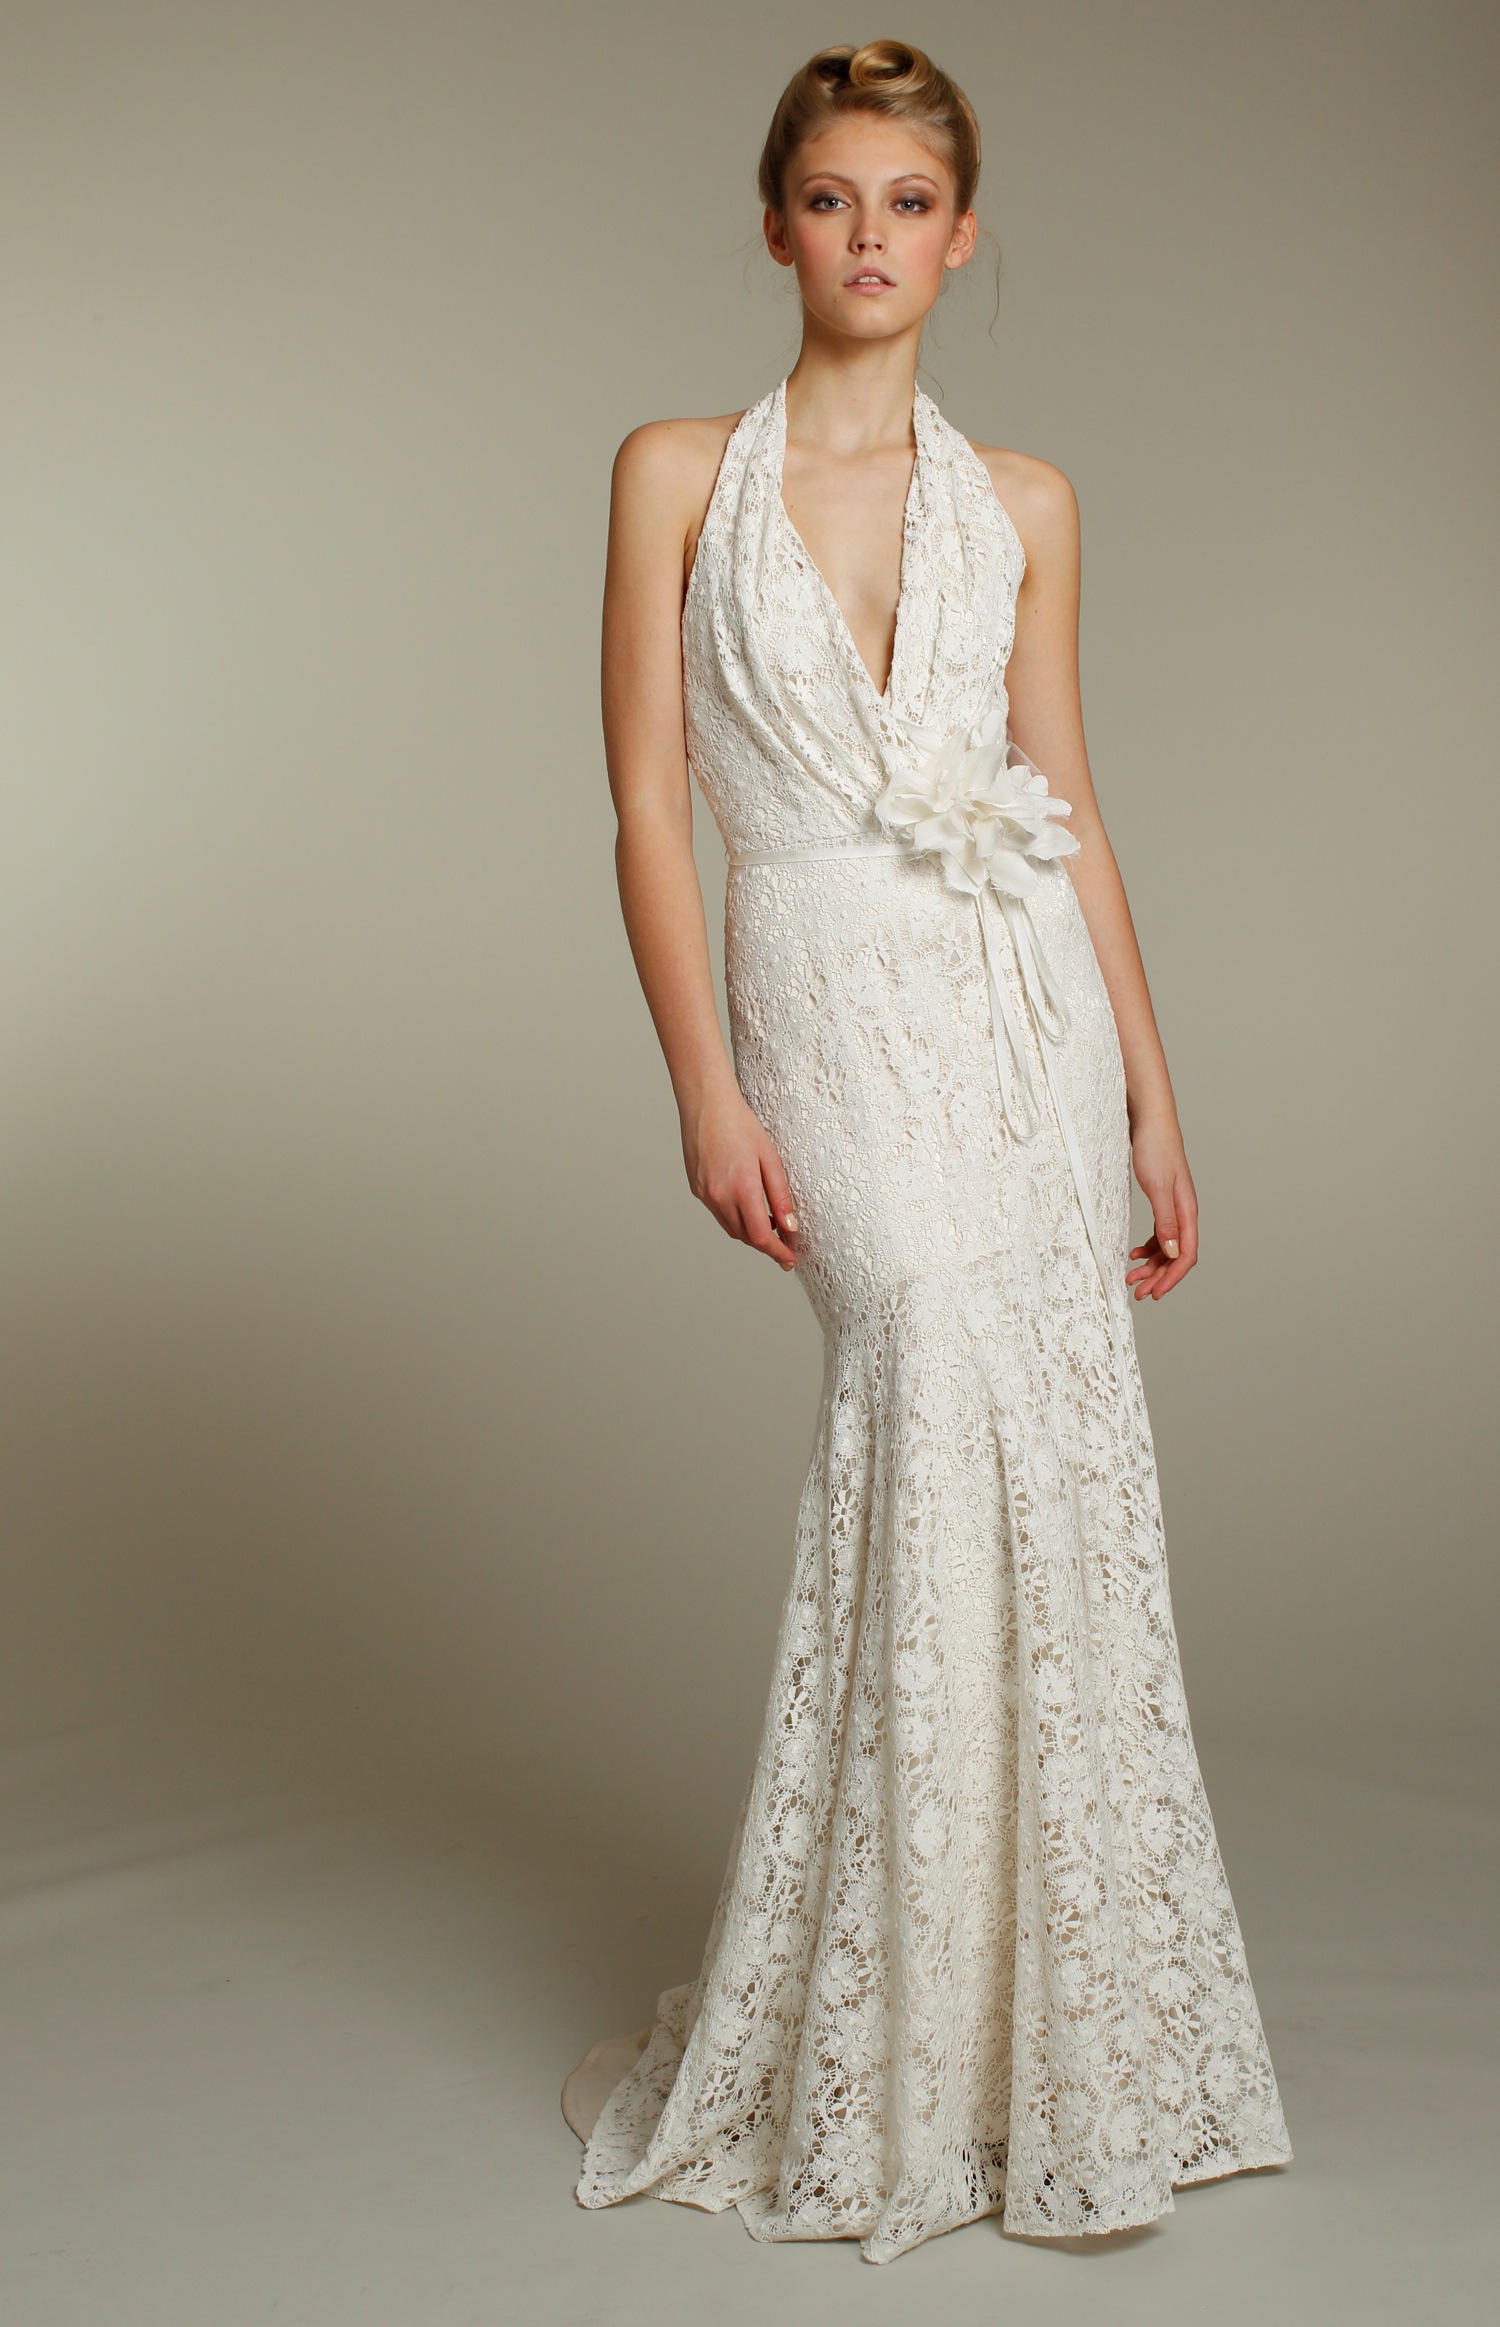 What Are Some Cool Informal Wedding Dress Ideas? The